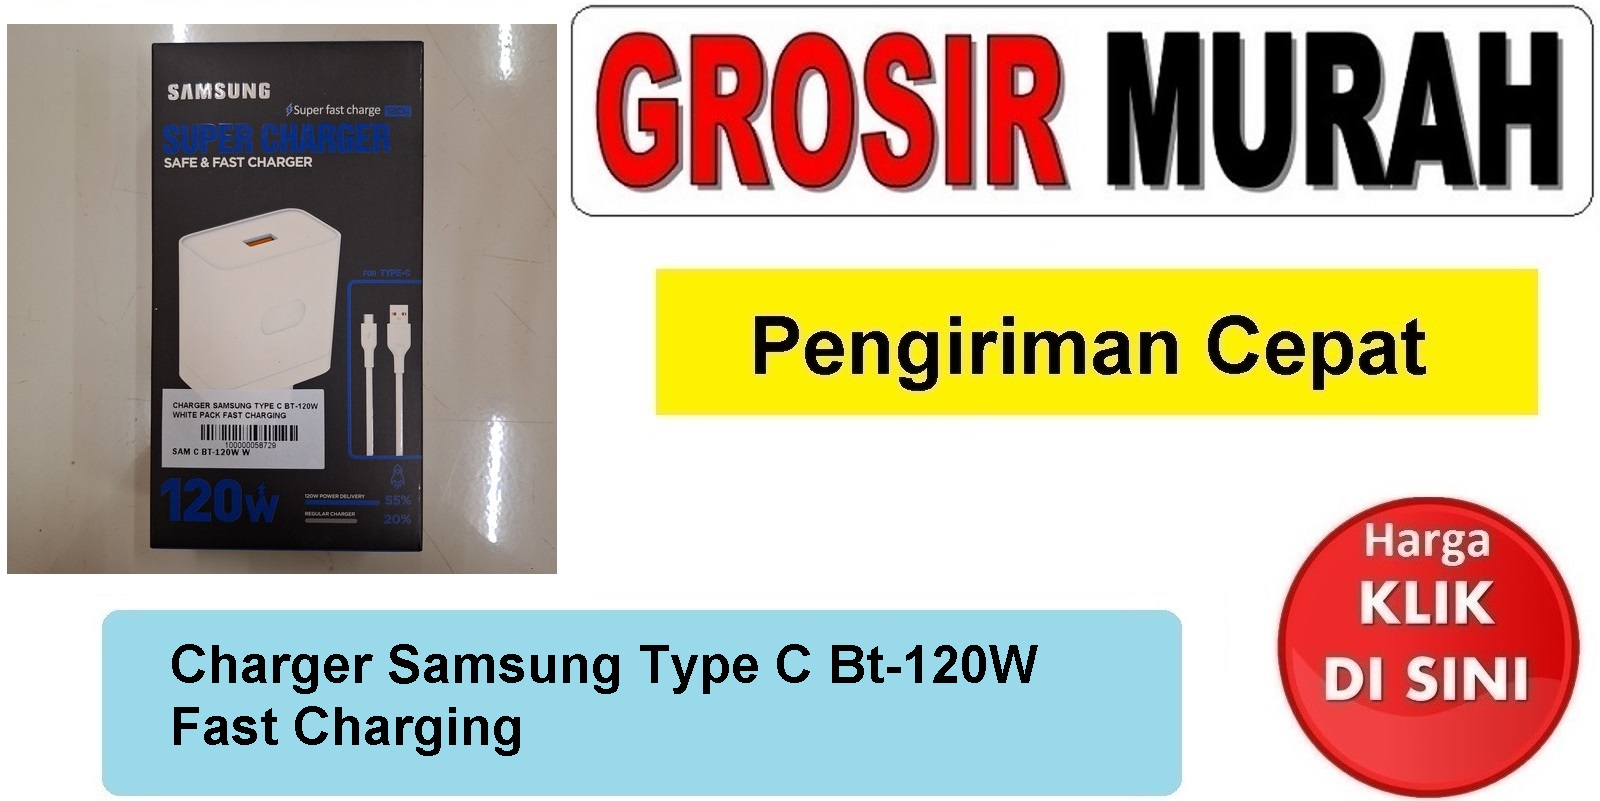 Charger Samsung Type C Bt-120W Fast Charging